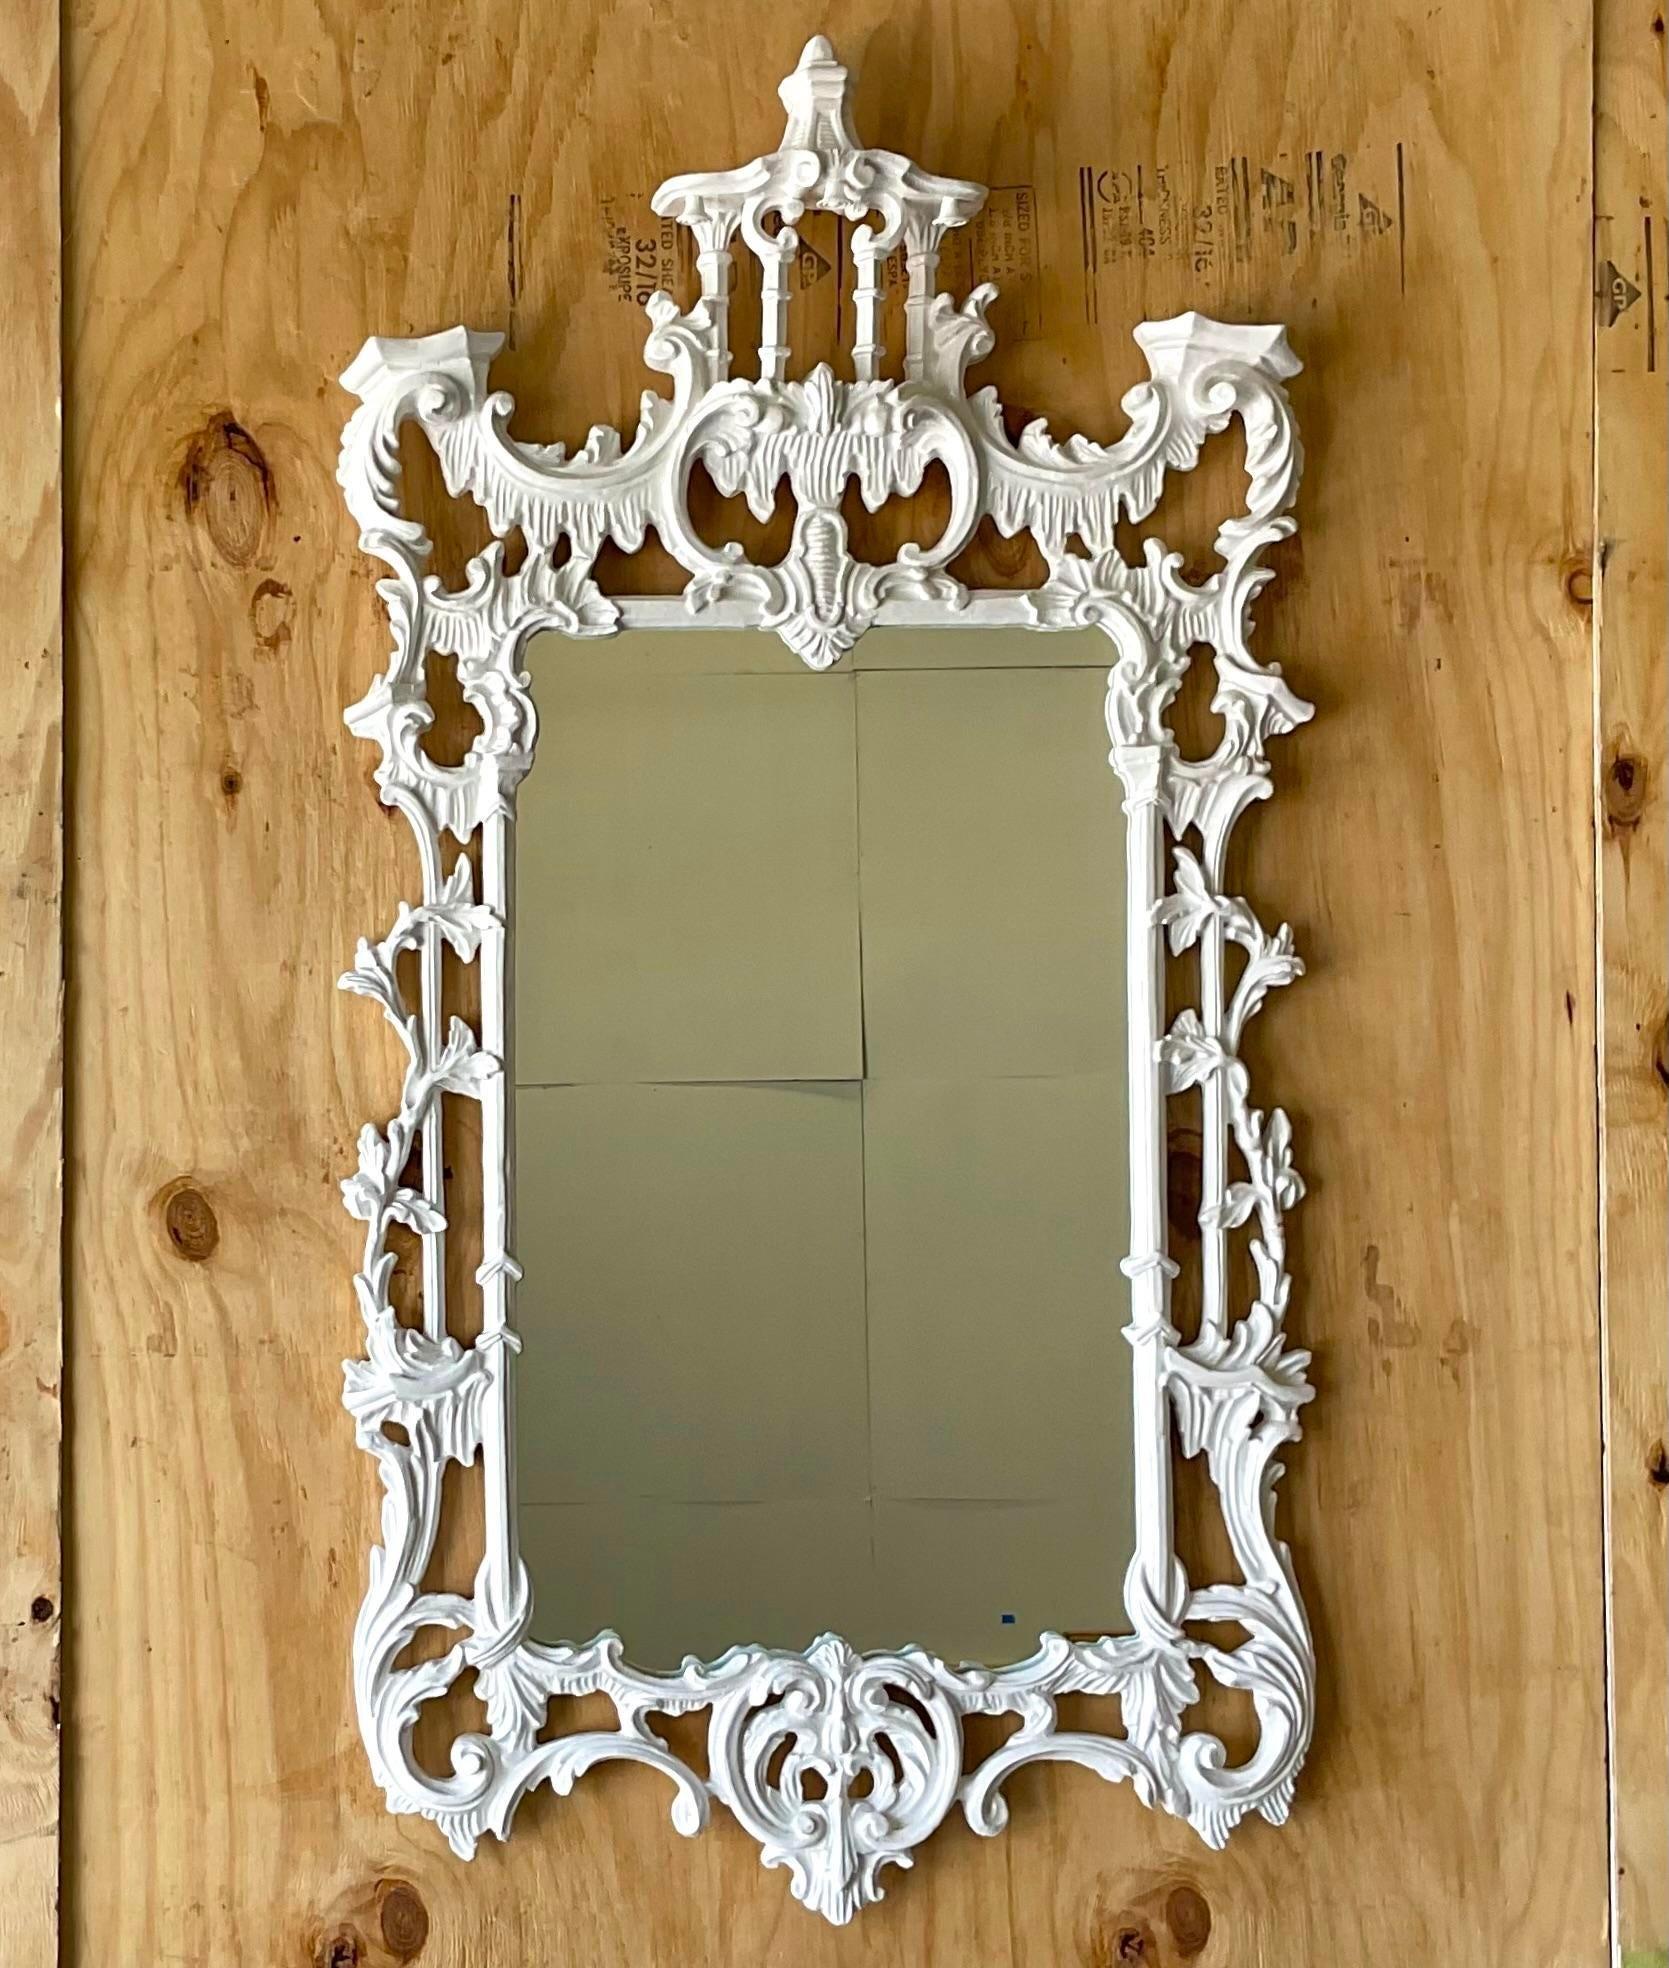 A fabulous vintage Asian wall mirror. The highly coveted Pagoda style in a high gloss white lacquered finish. Tall and impressive. Acquired from a Palm Beach estate. 